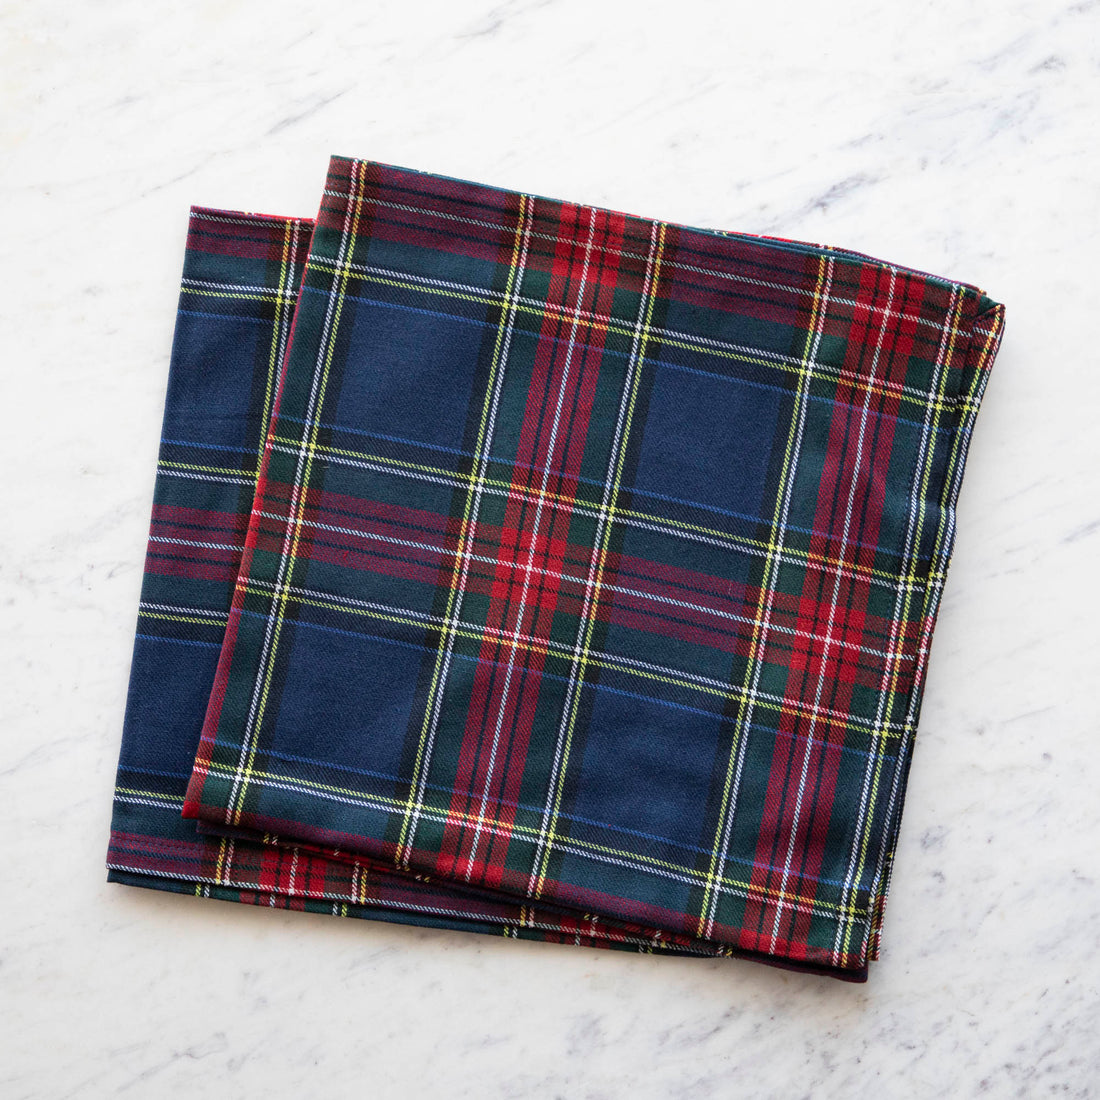 A plaid necktie with a windsor knot on a 100% cotton Taylor Linen Cape Breton napkin on a marble surface.